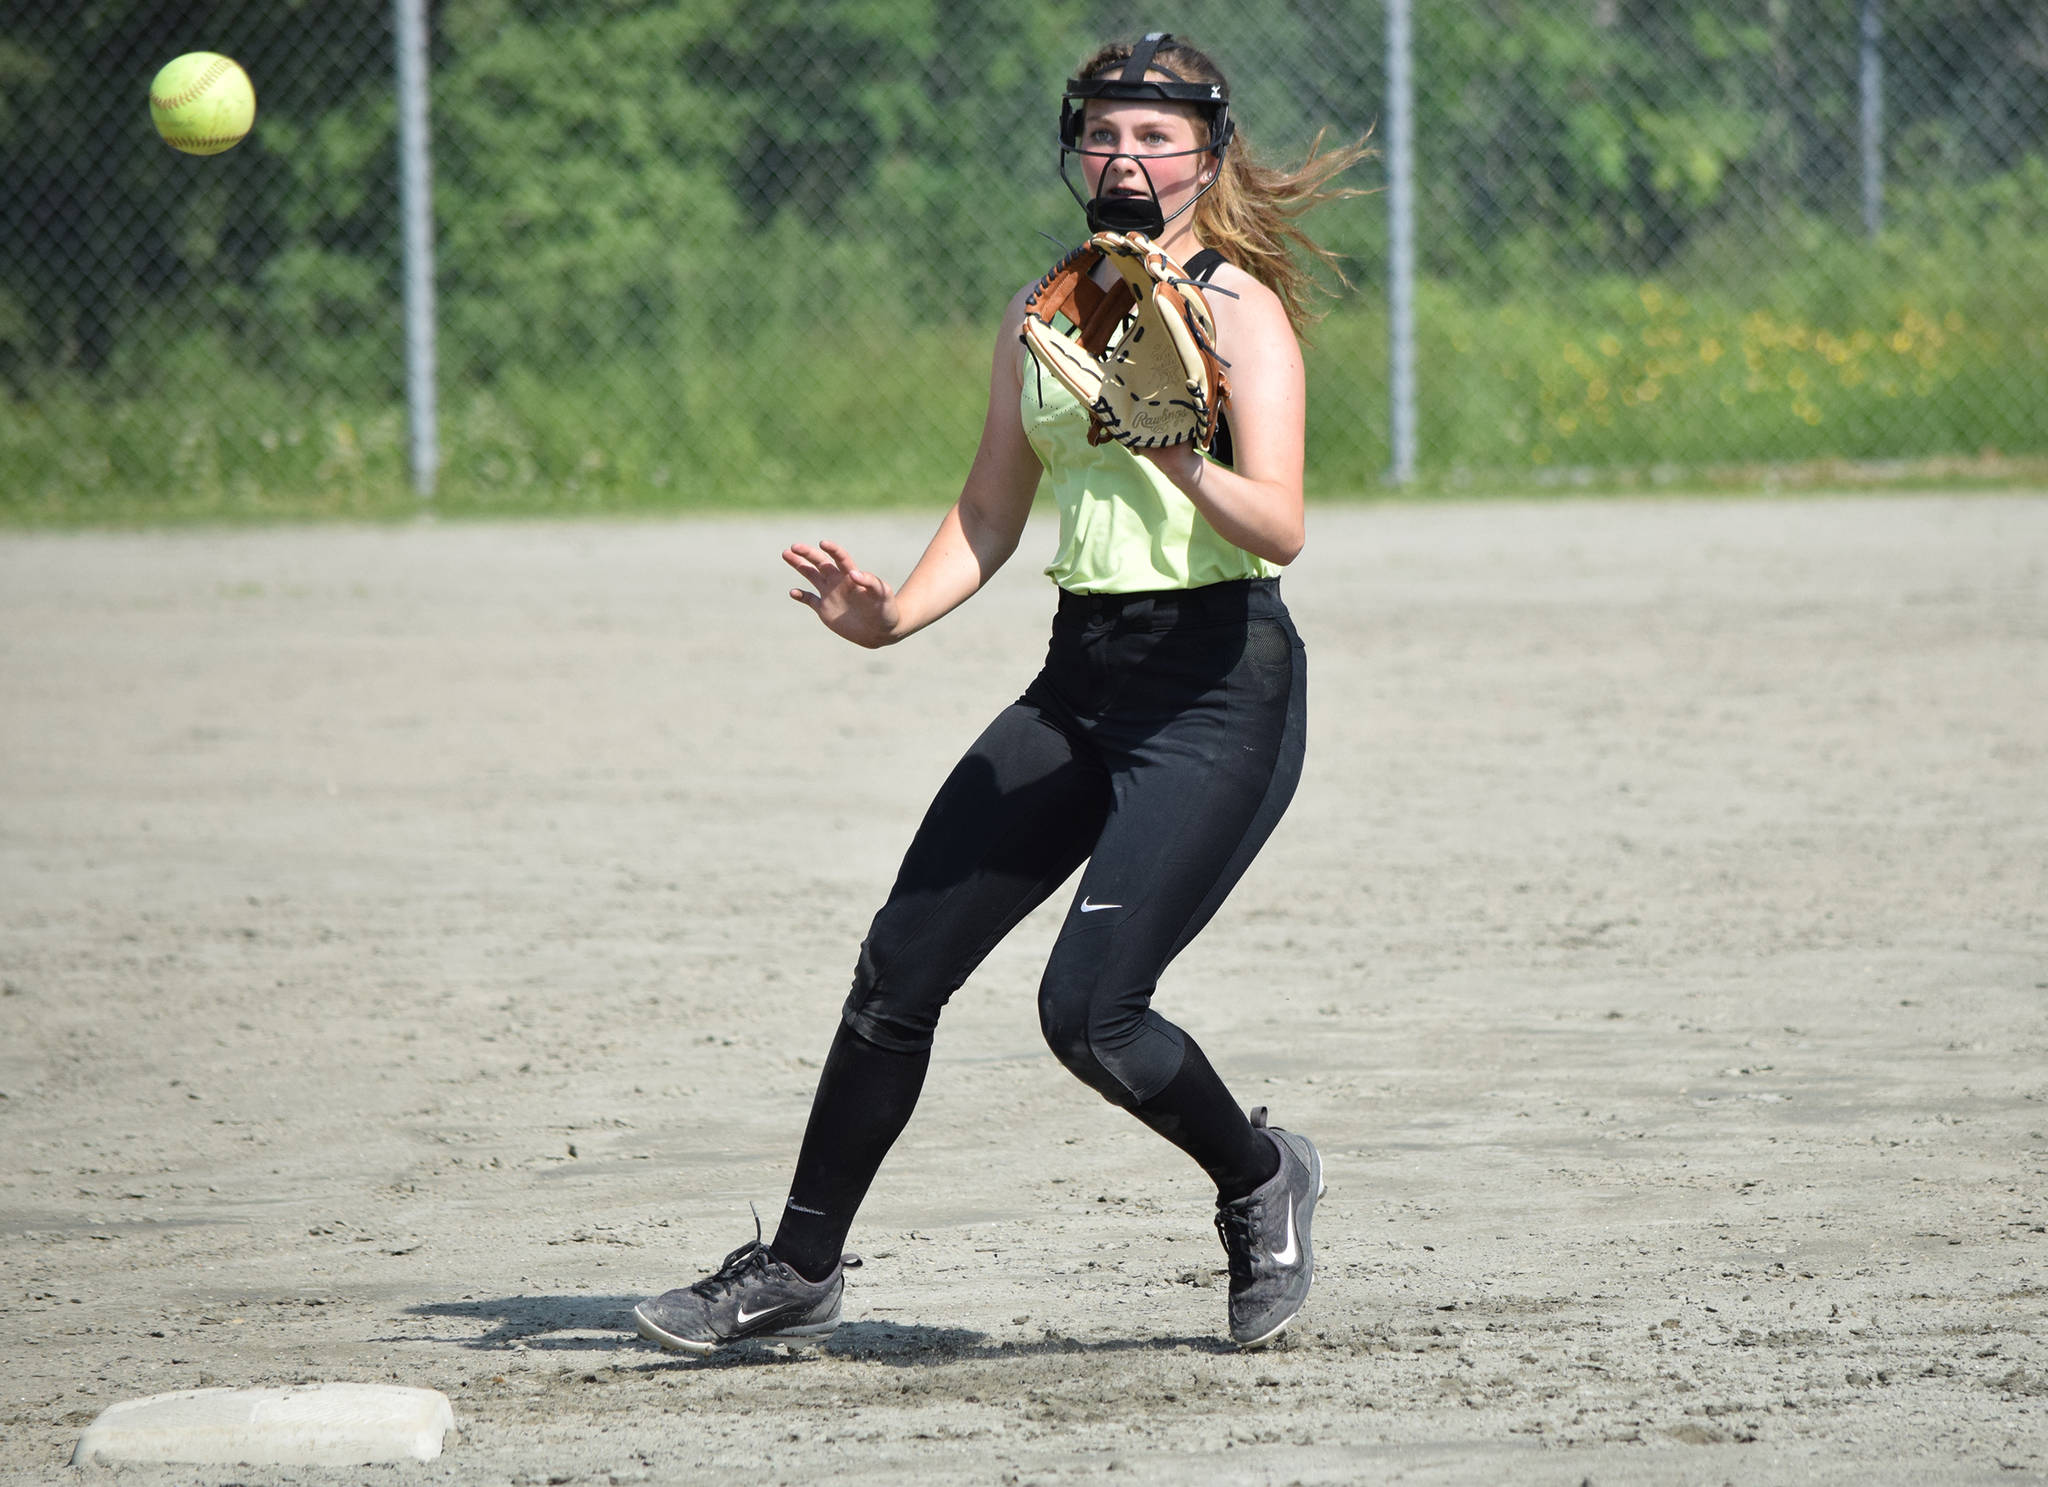 Gastineau Channel Little League all-star Gloria Bixby prepares to make a catch during team practice at Melvin Park on Saturday, June 29, 2019. Bixby is one of 13 players on the junior softball all-star team that will play in a best-of-five game series against the Ketchikan Little League all-stars beginning on Tuesday. (Nolin Ainsworth | Juneau Empire)